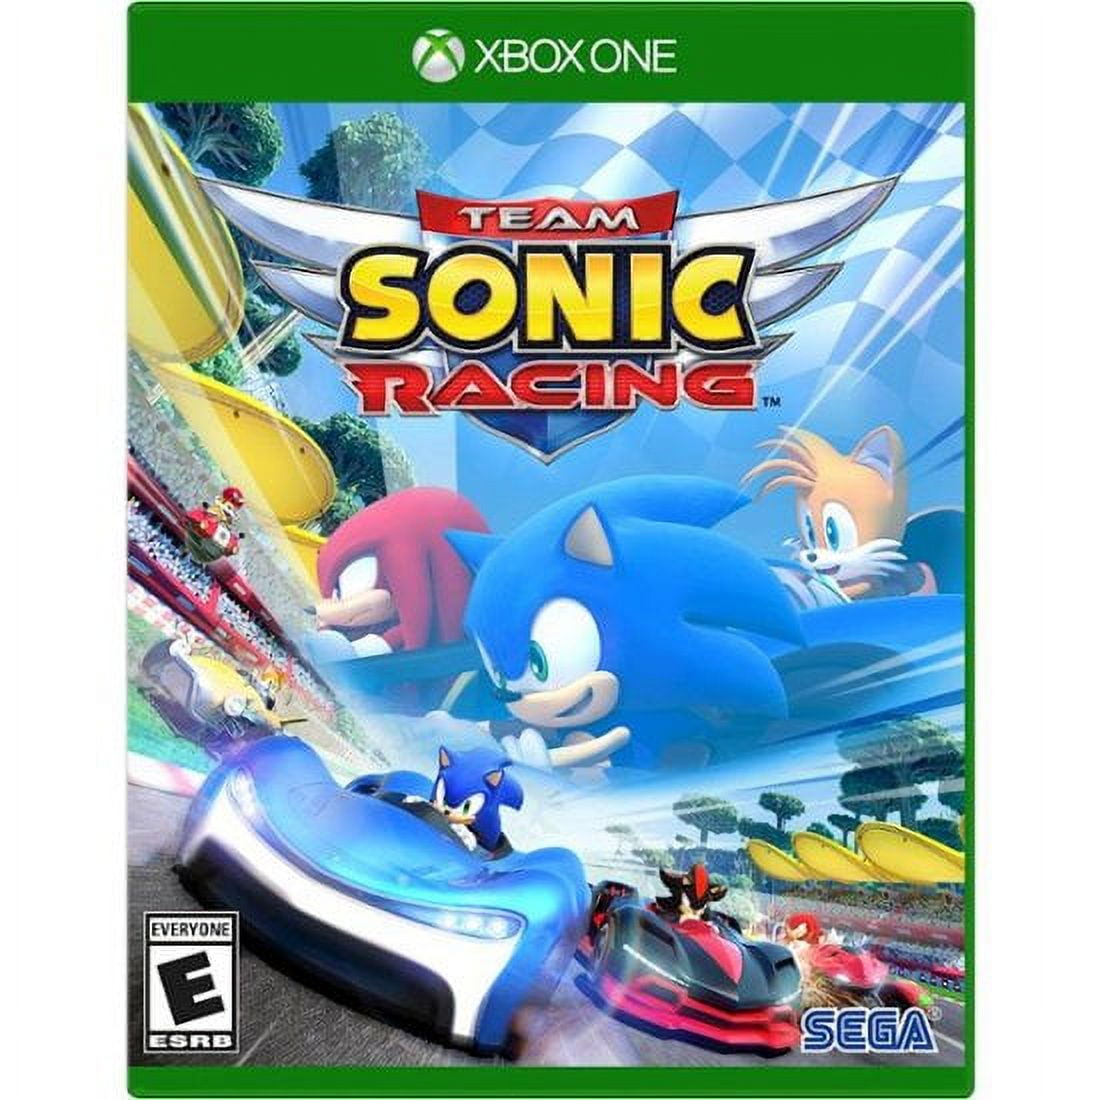 You Can Win A Sonic The Hedgehog 2 Xbox Series S Complete With